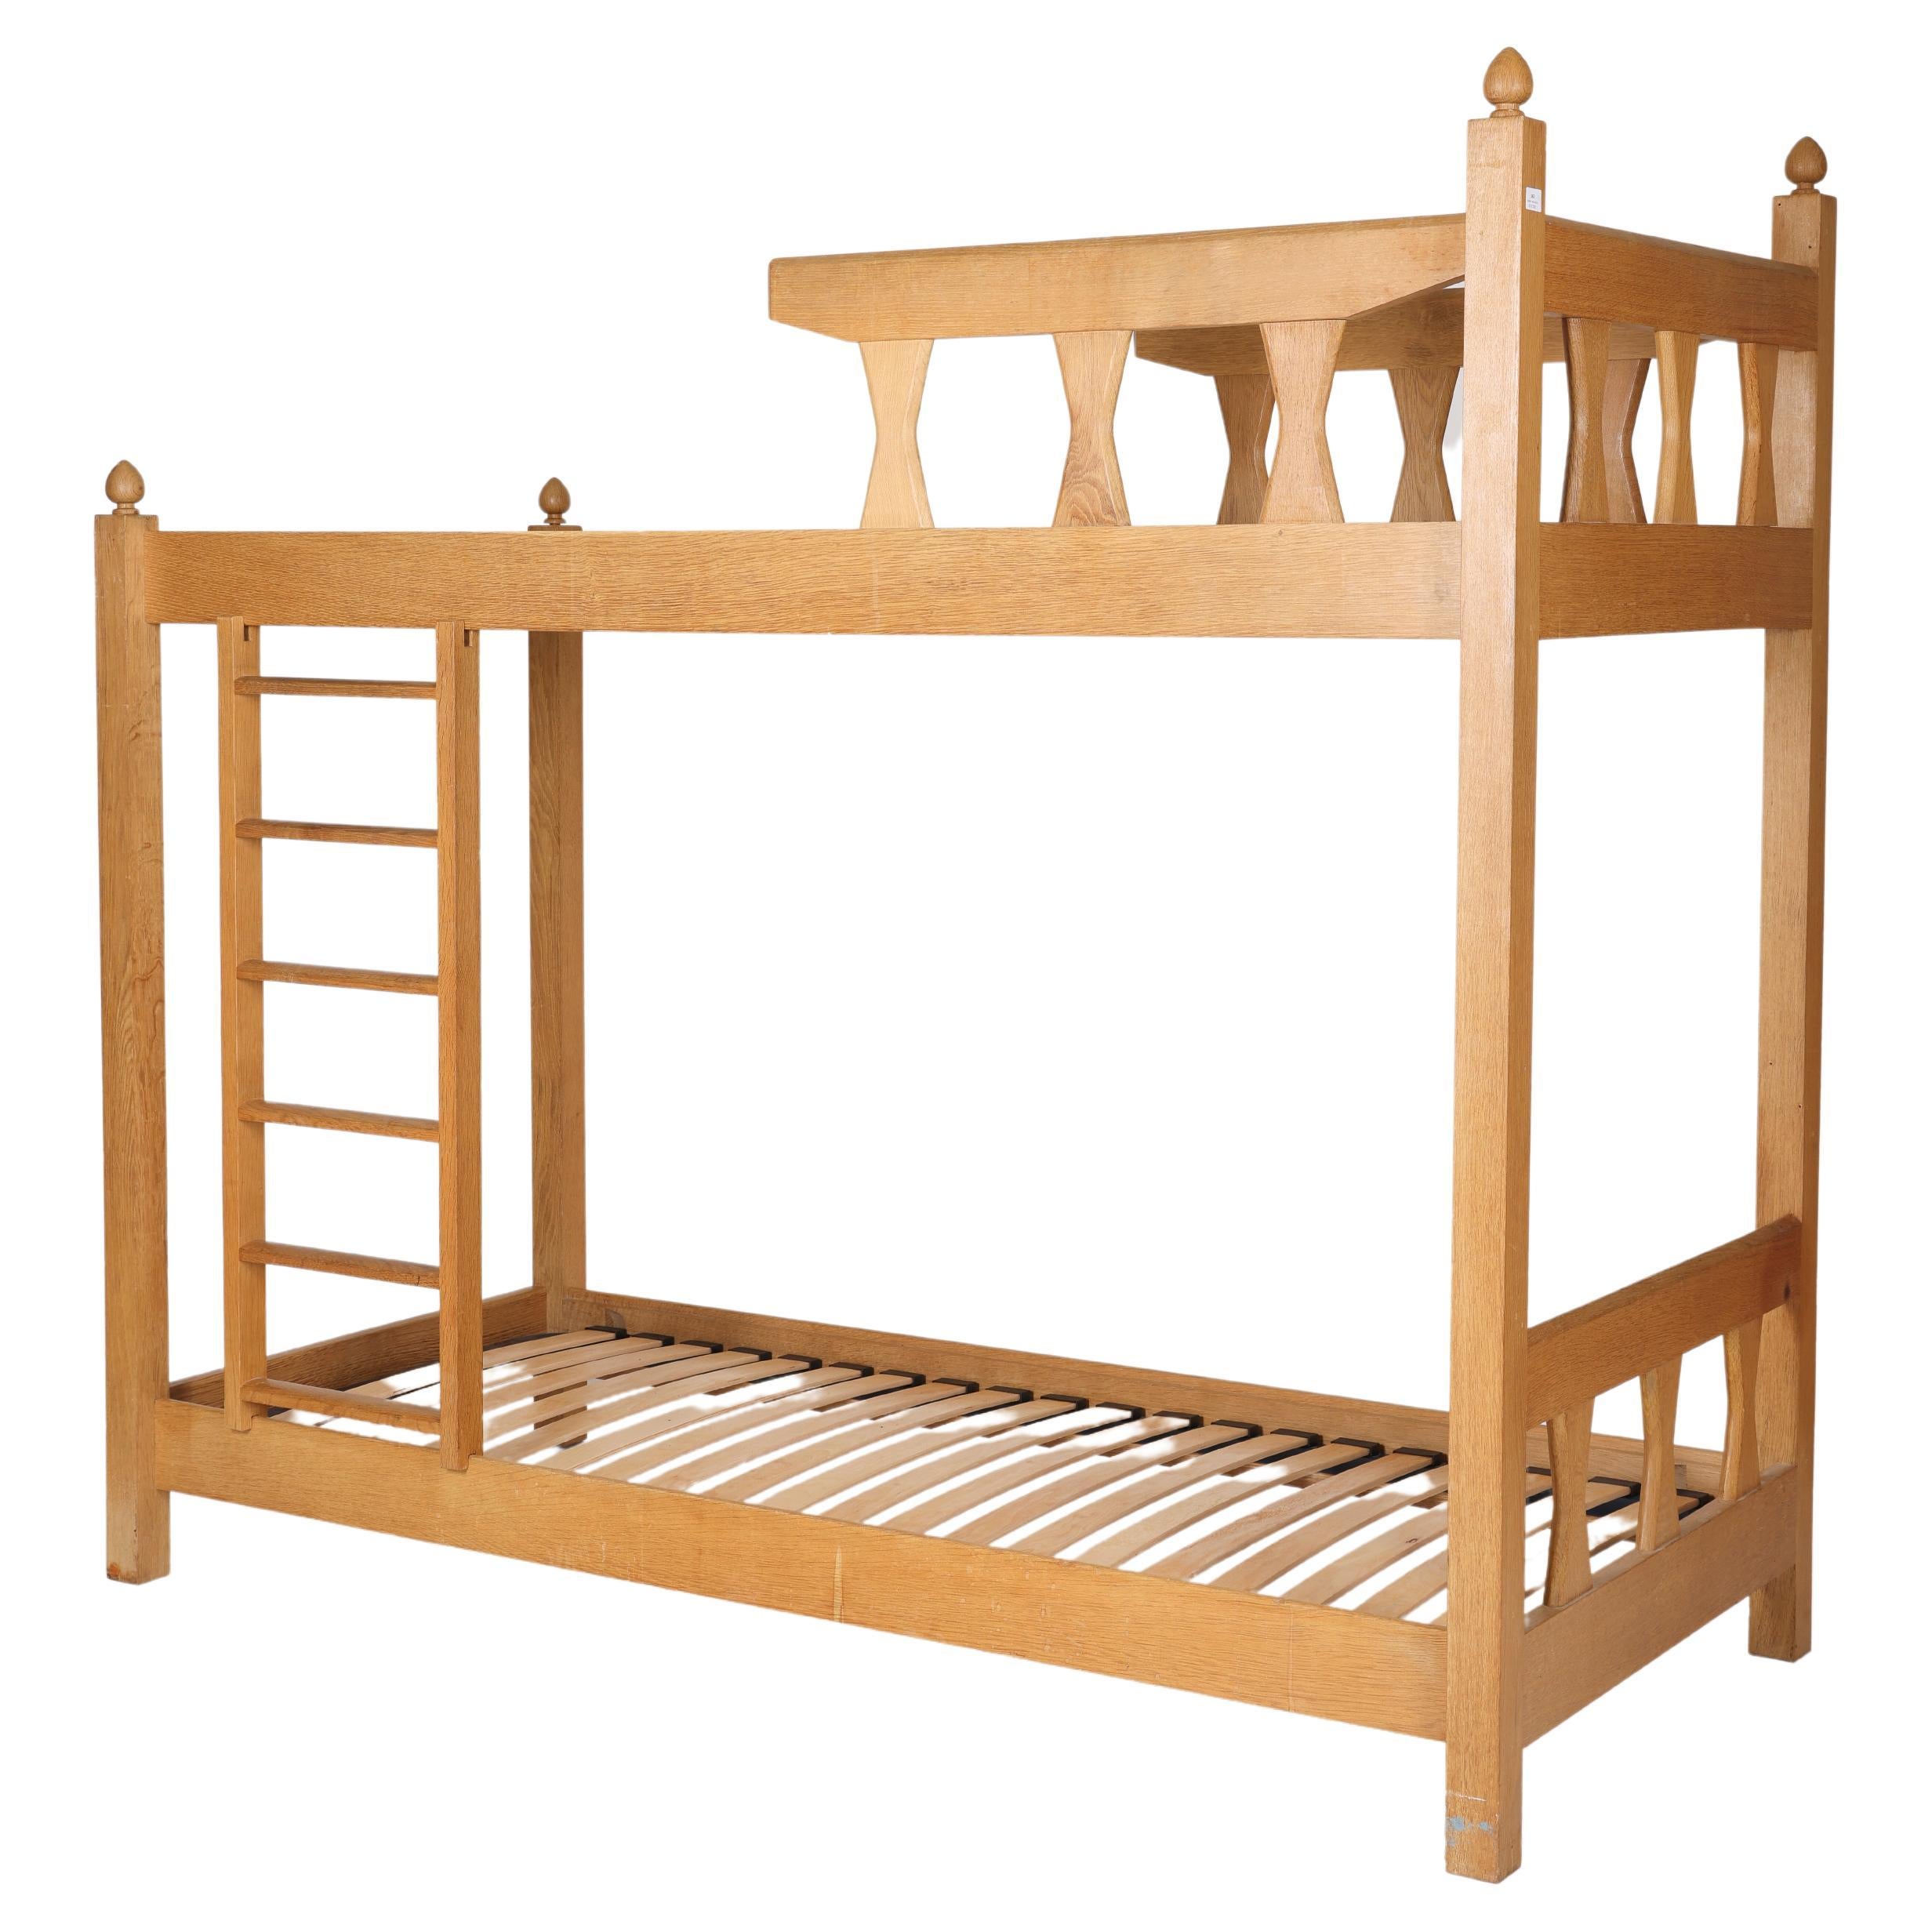 Mid-century Solid wood bunk bed by French designers Guillerme and Chambron